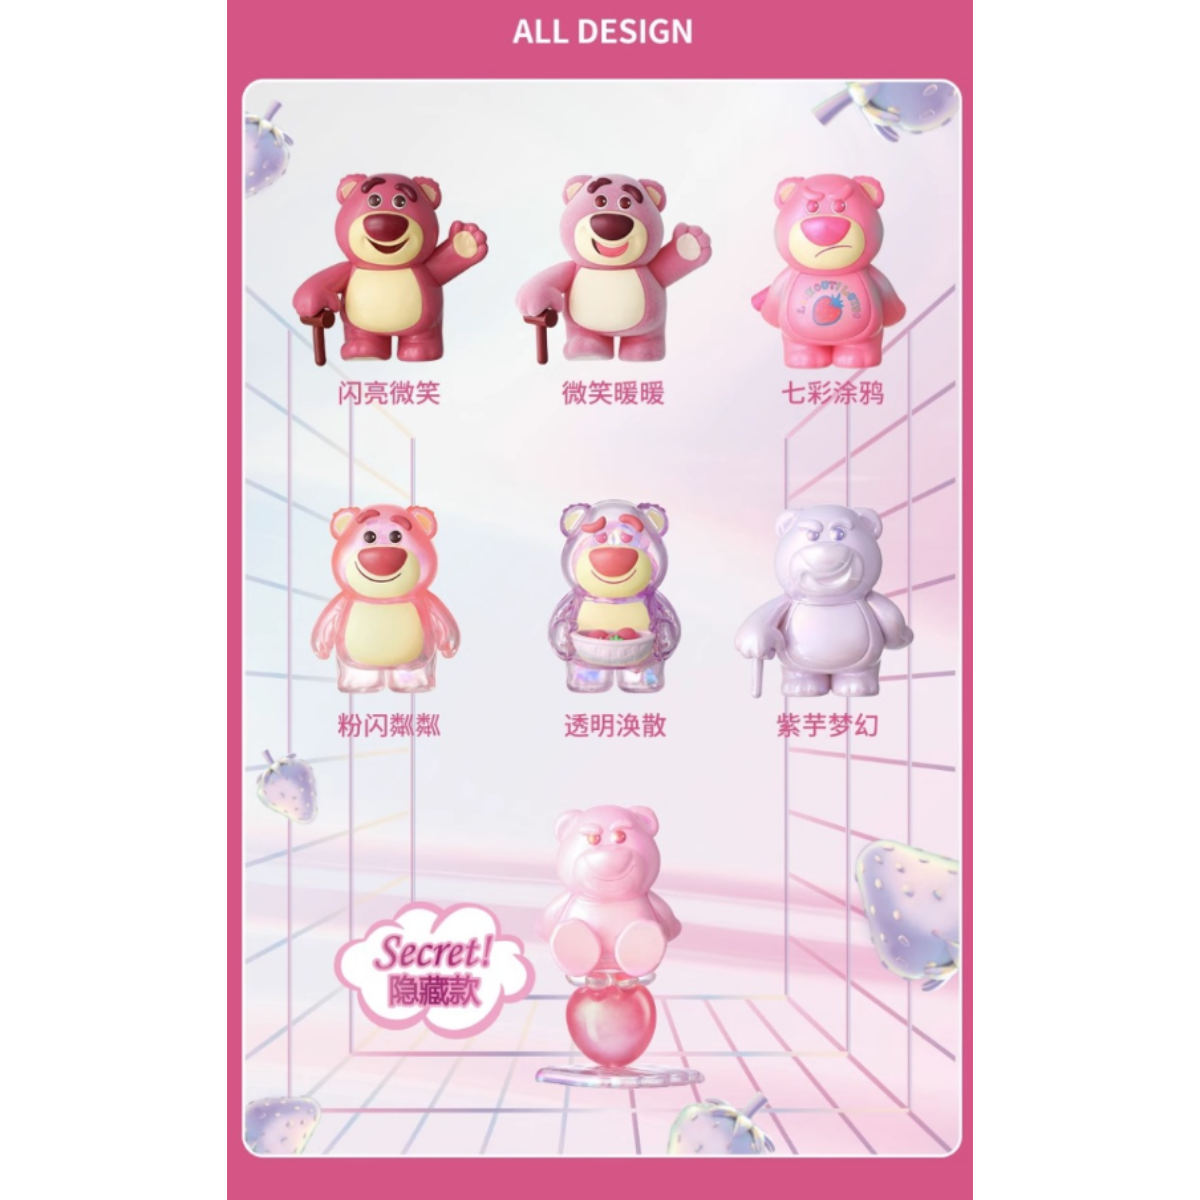 Miniso x Disney Lotso Ever-Changing Series-Single Box (Random)-Miniso-Ace Cards & Collectibles